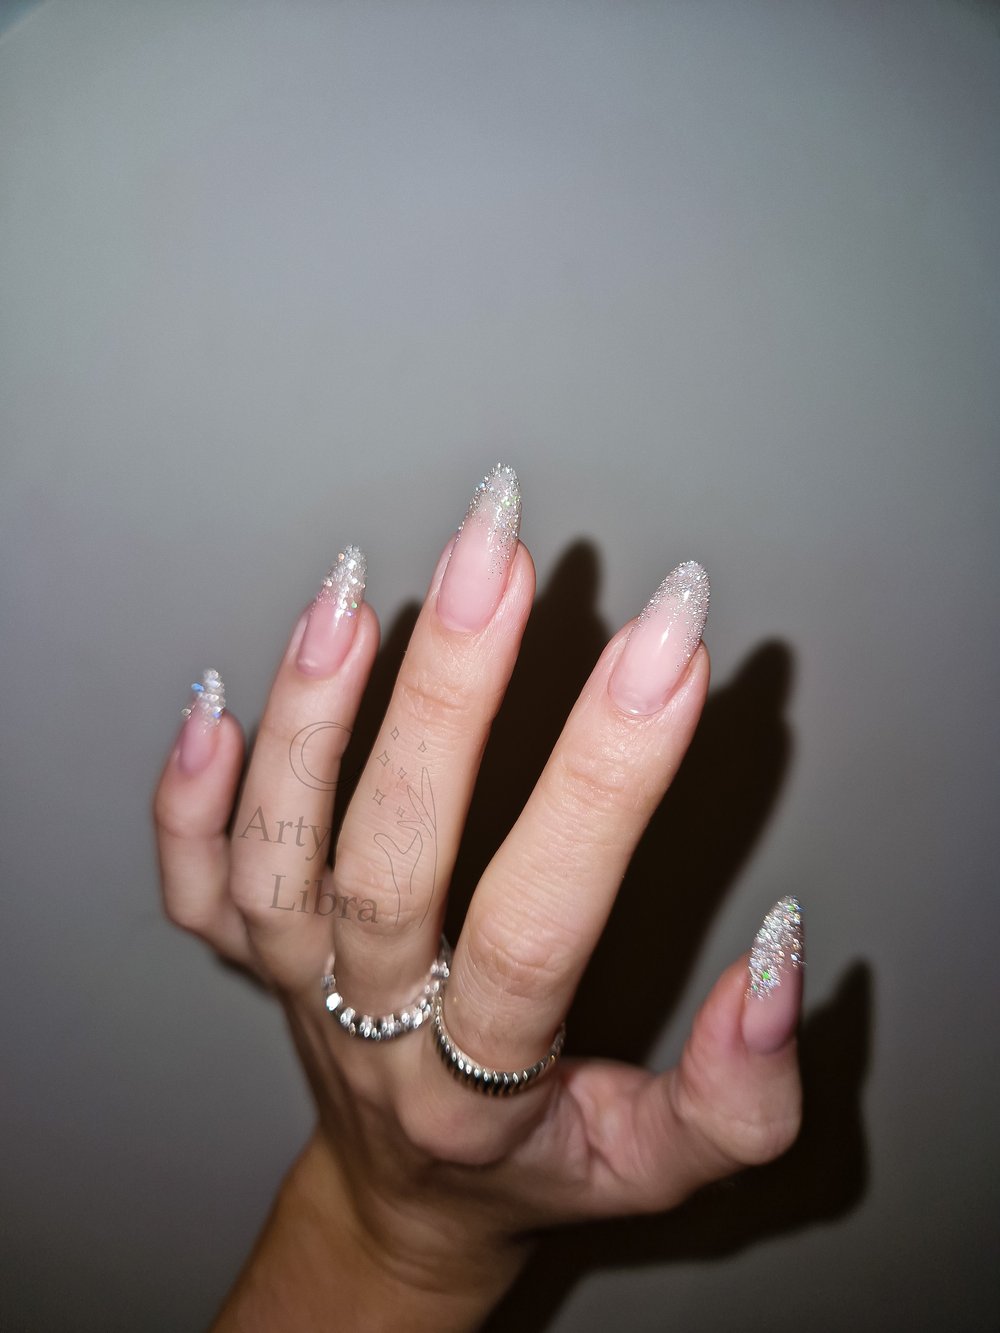 Pink Gradient French Tips Press On False Nails — Arty Libra